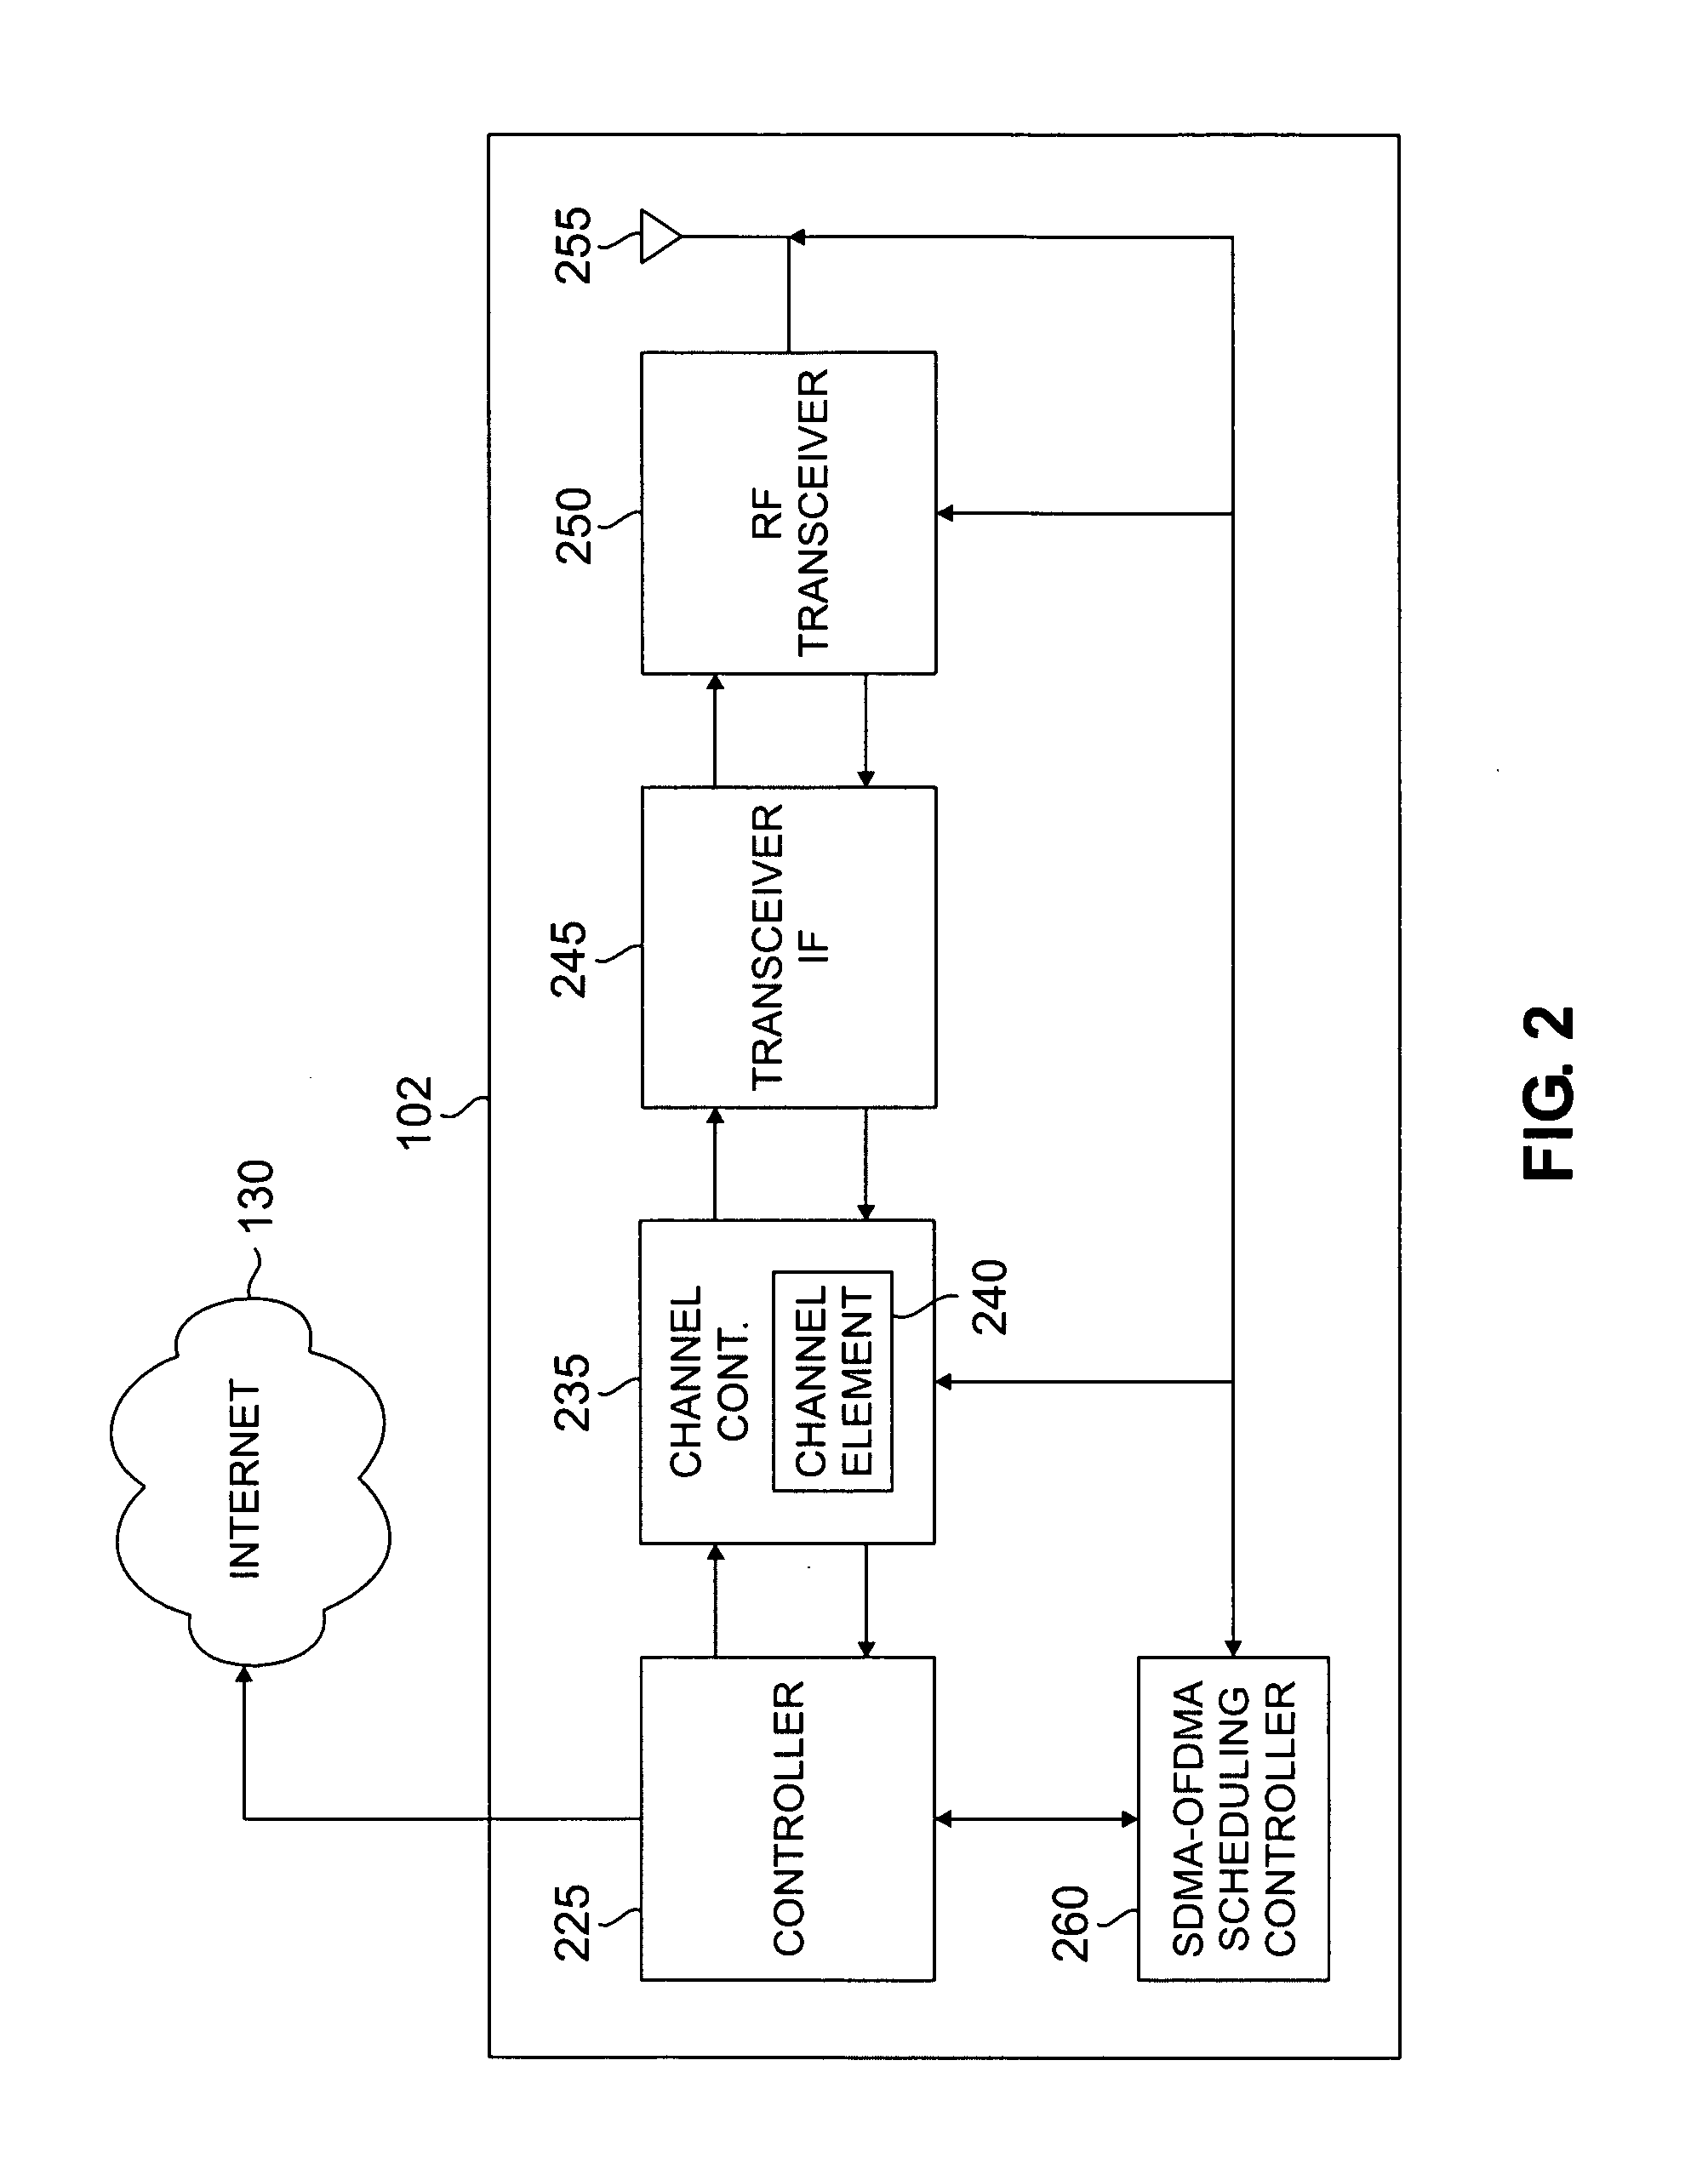 Apparatus and method for downlink scheduling in a SDMA-enabled OFDMA wireless network